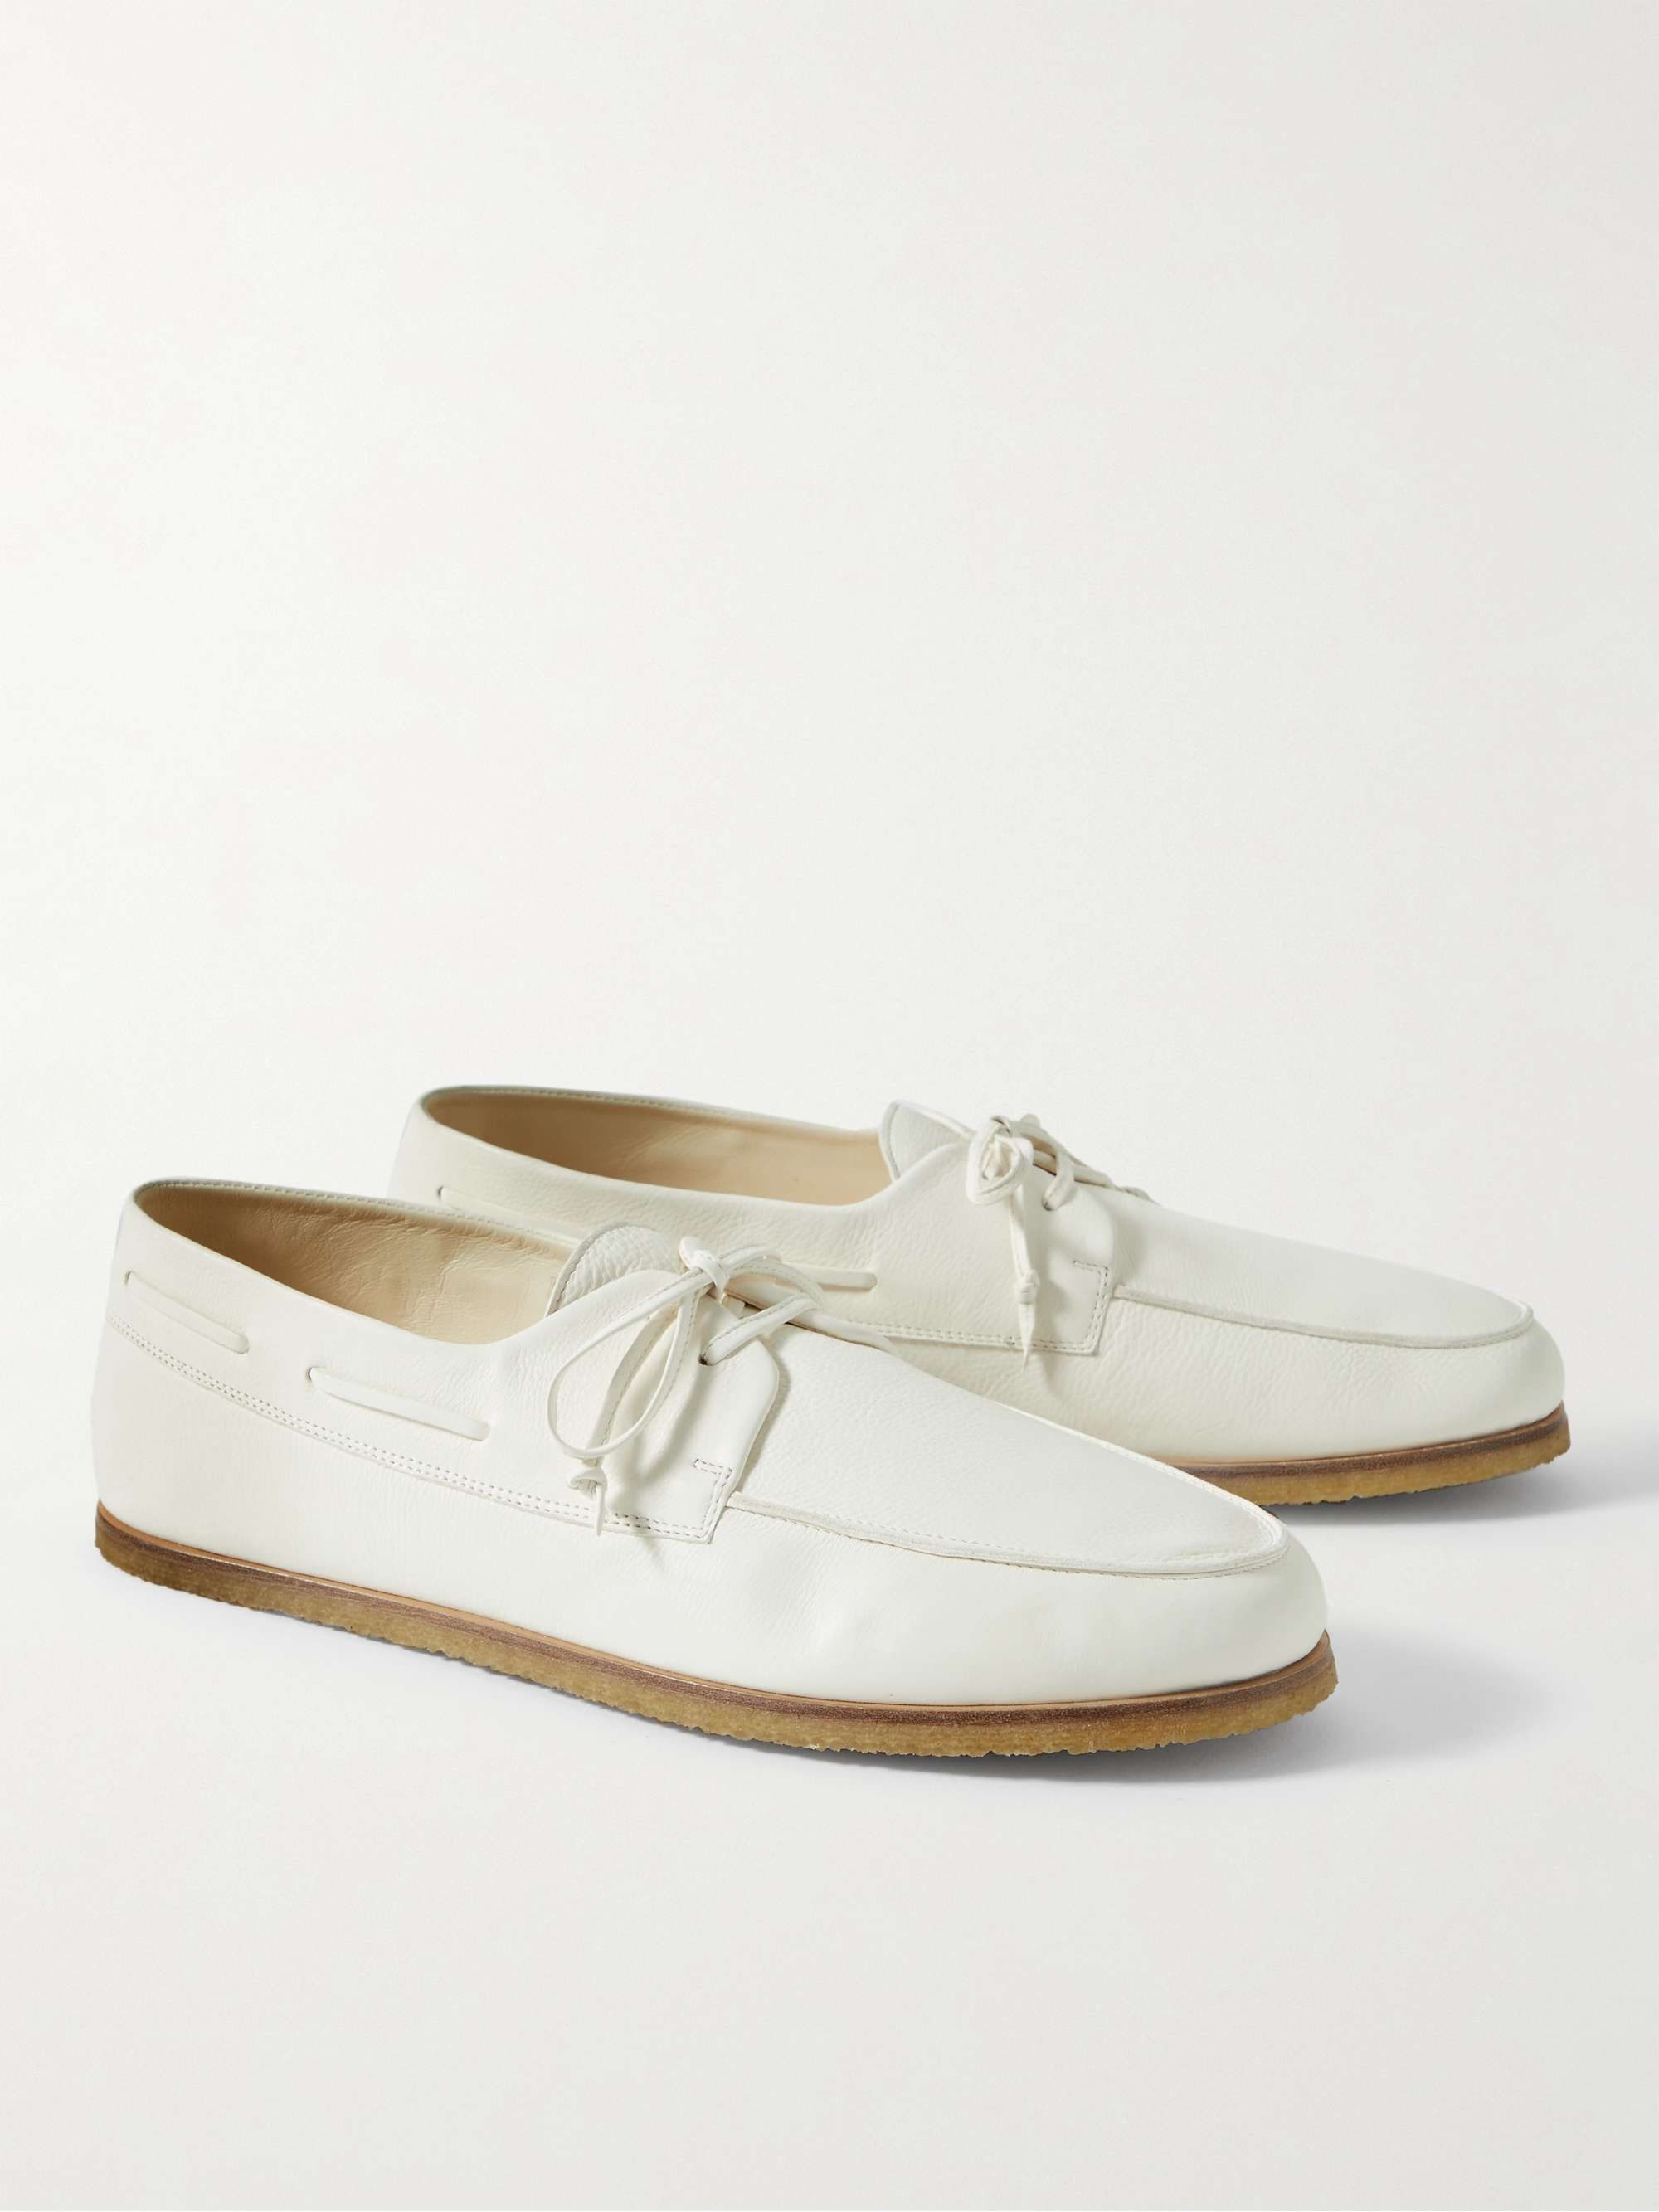 THE ROW Sailor Full-Grain Leather Boat Shoes